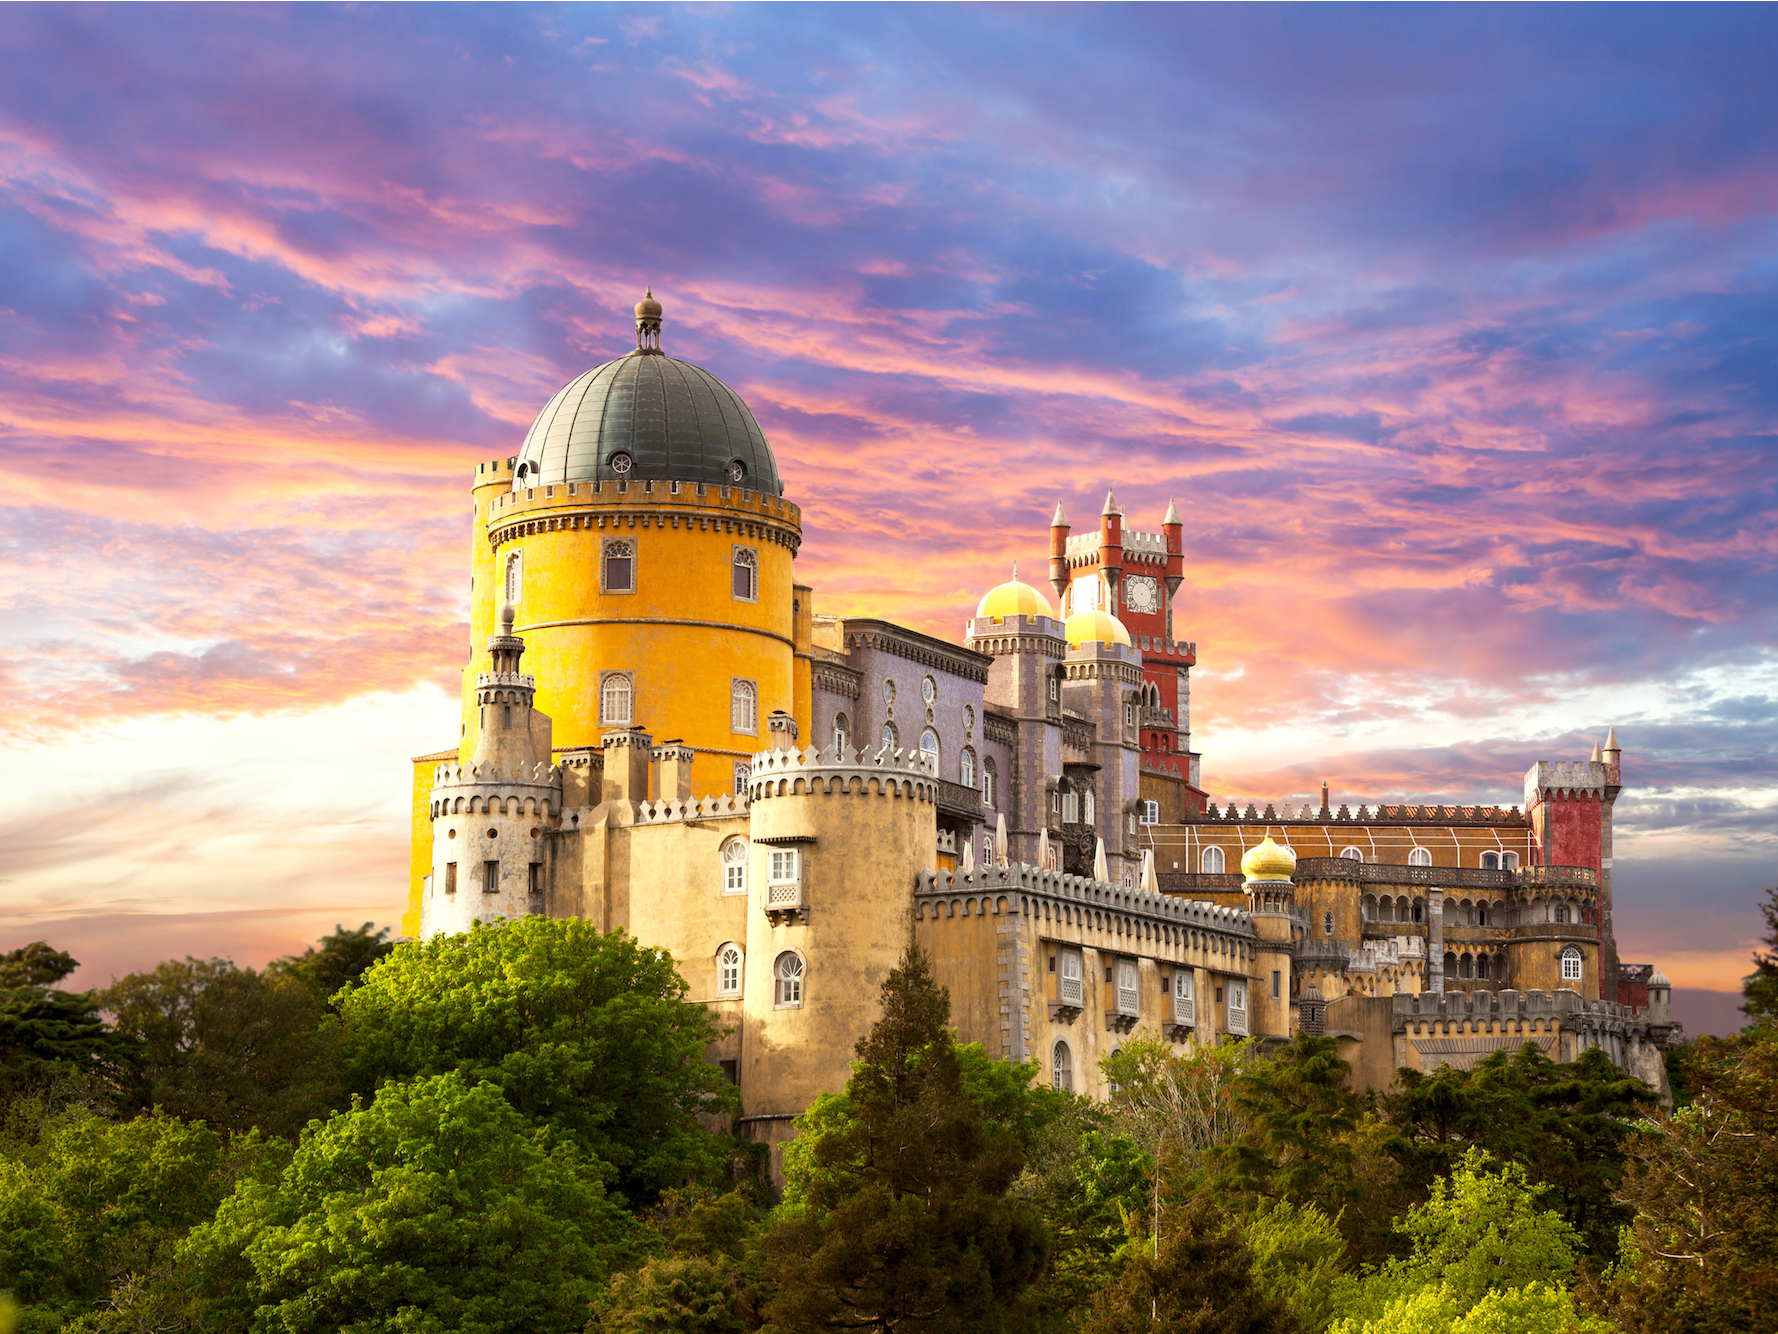 Pena National Palace is about as real as fairy-tale castles get